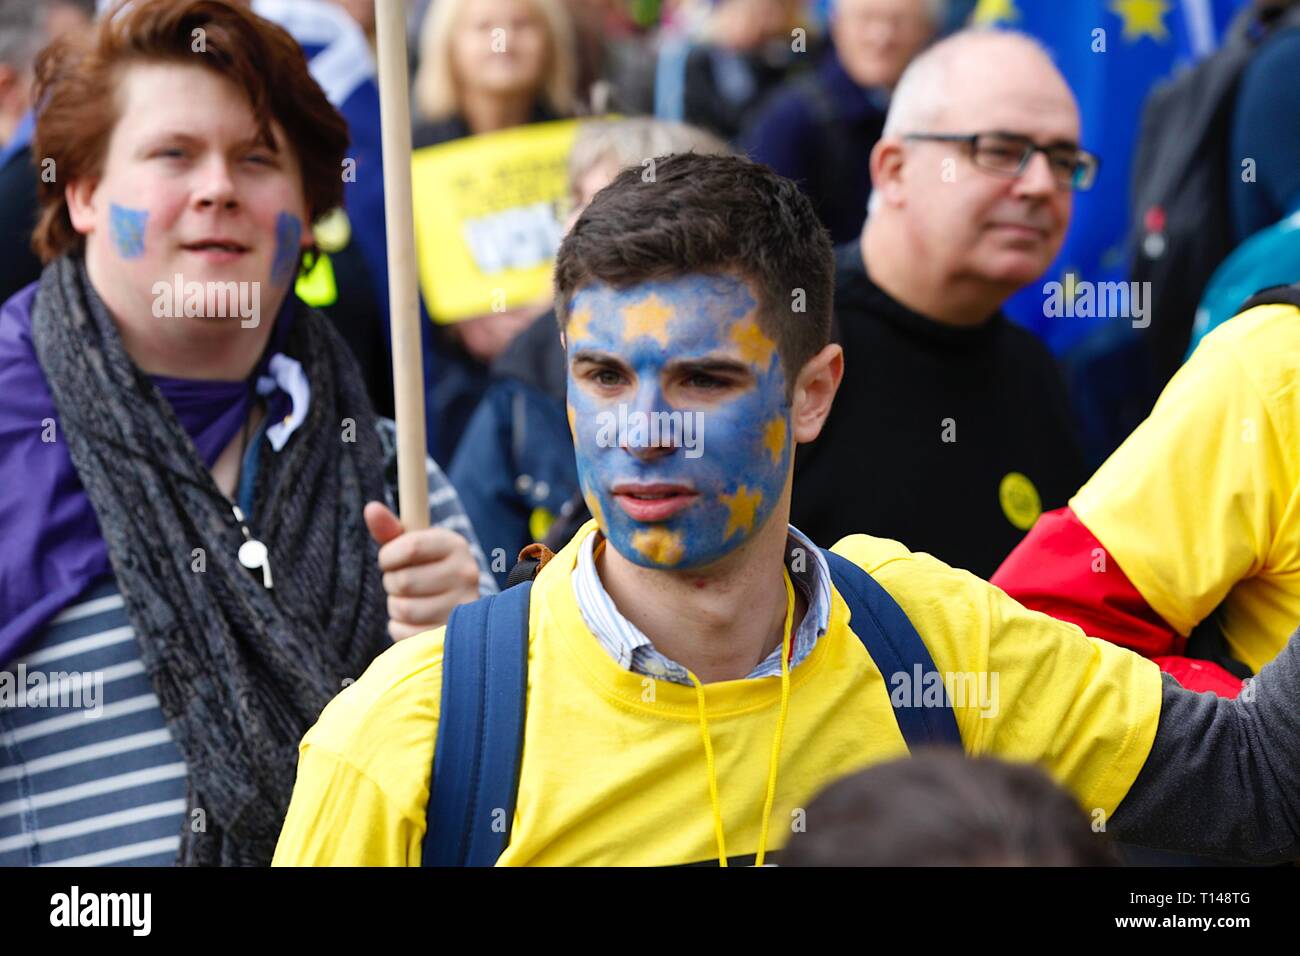 London, UK. 23 Mar, 2019. People’s Vote March: Hundreds of thousands of pro-EU supporters attend a mass march to Westminster. People are expected to join the march from Park Lane to Parliament Square beginning at noon with speeches commencing at 2.45pm from all political party’s. A young man with a painted EU flag face. ©Paul Lawrenson 2019, Photo Credit: Paul Lawrenson/Alamy Live News Stock Photo